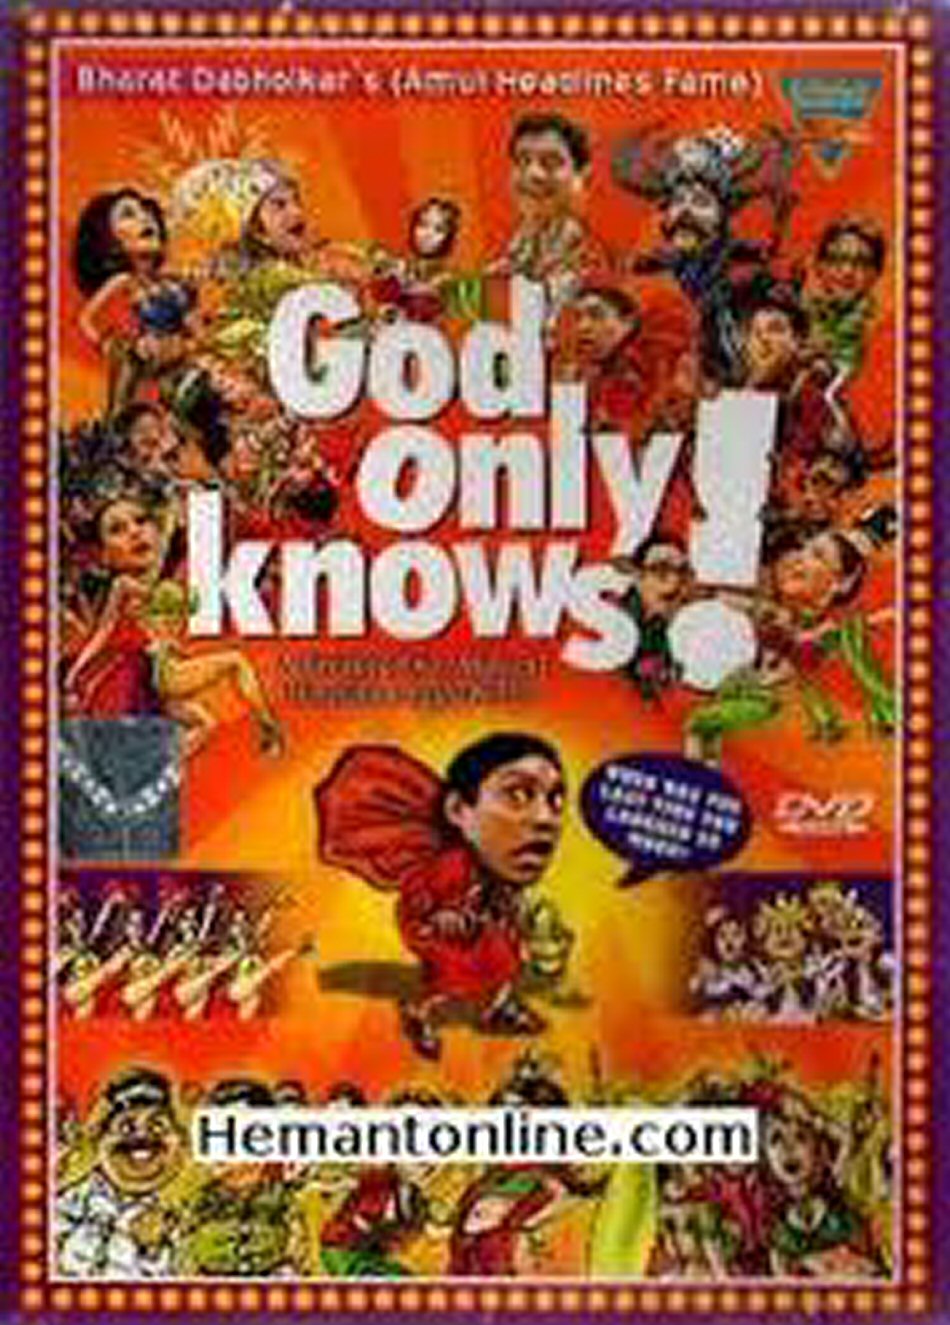 God Only Knows! Poster